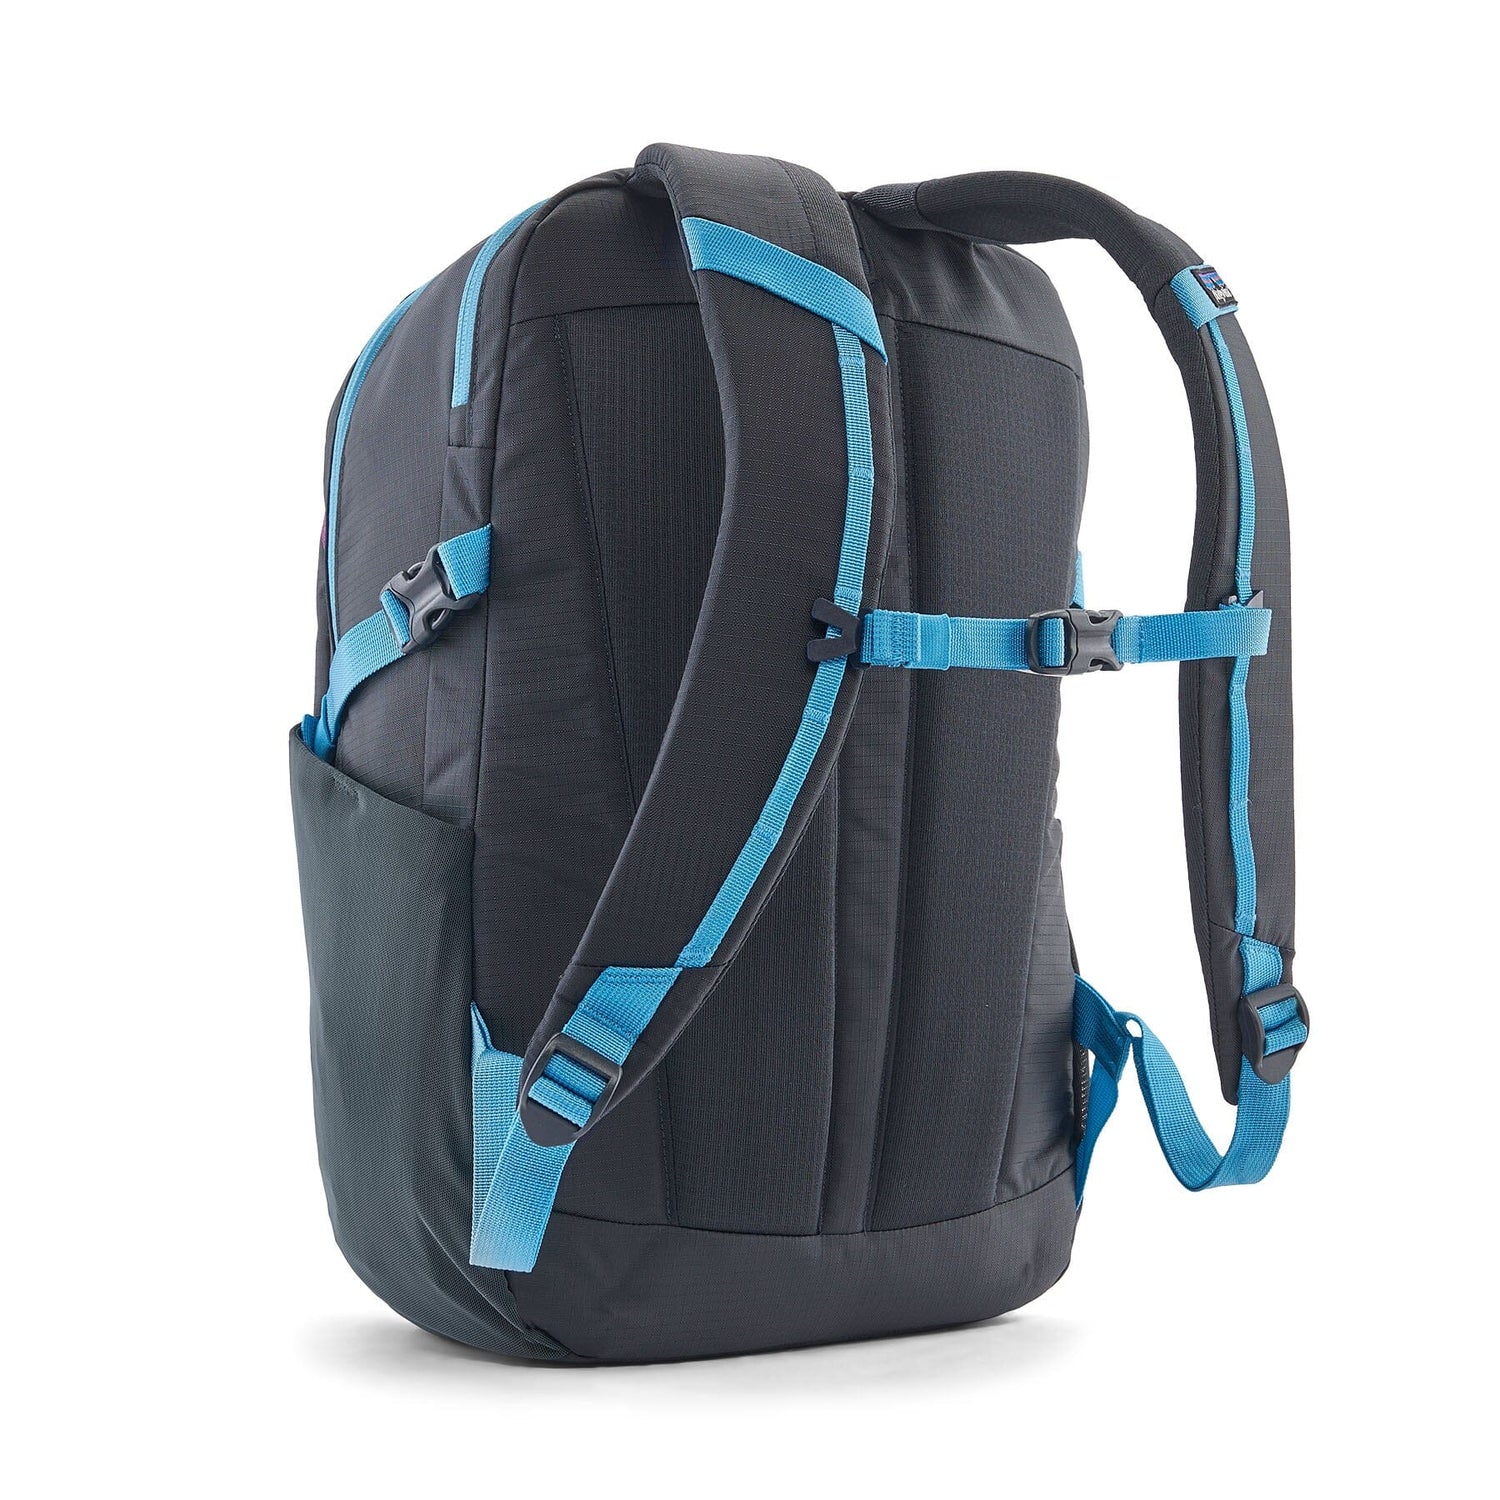 Patagonia Refugio Day Pack 26L - Recycled Polyester Black Bags